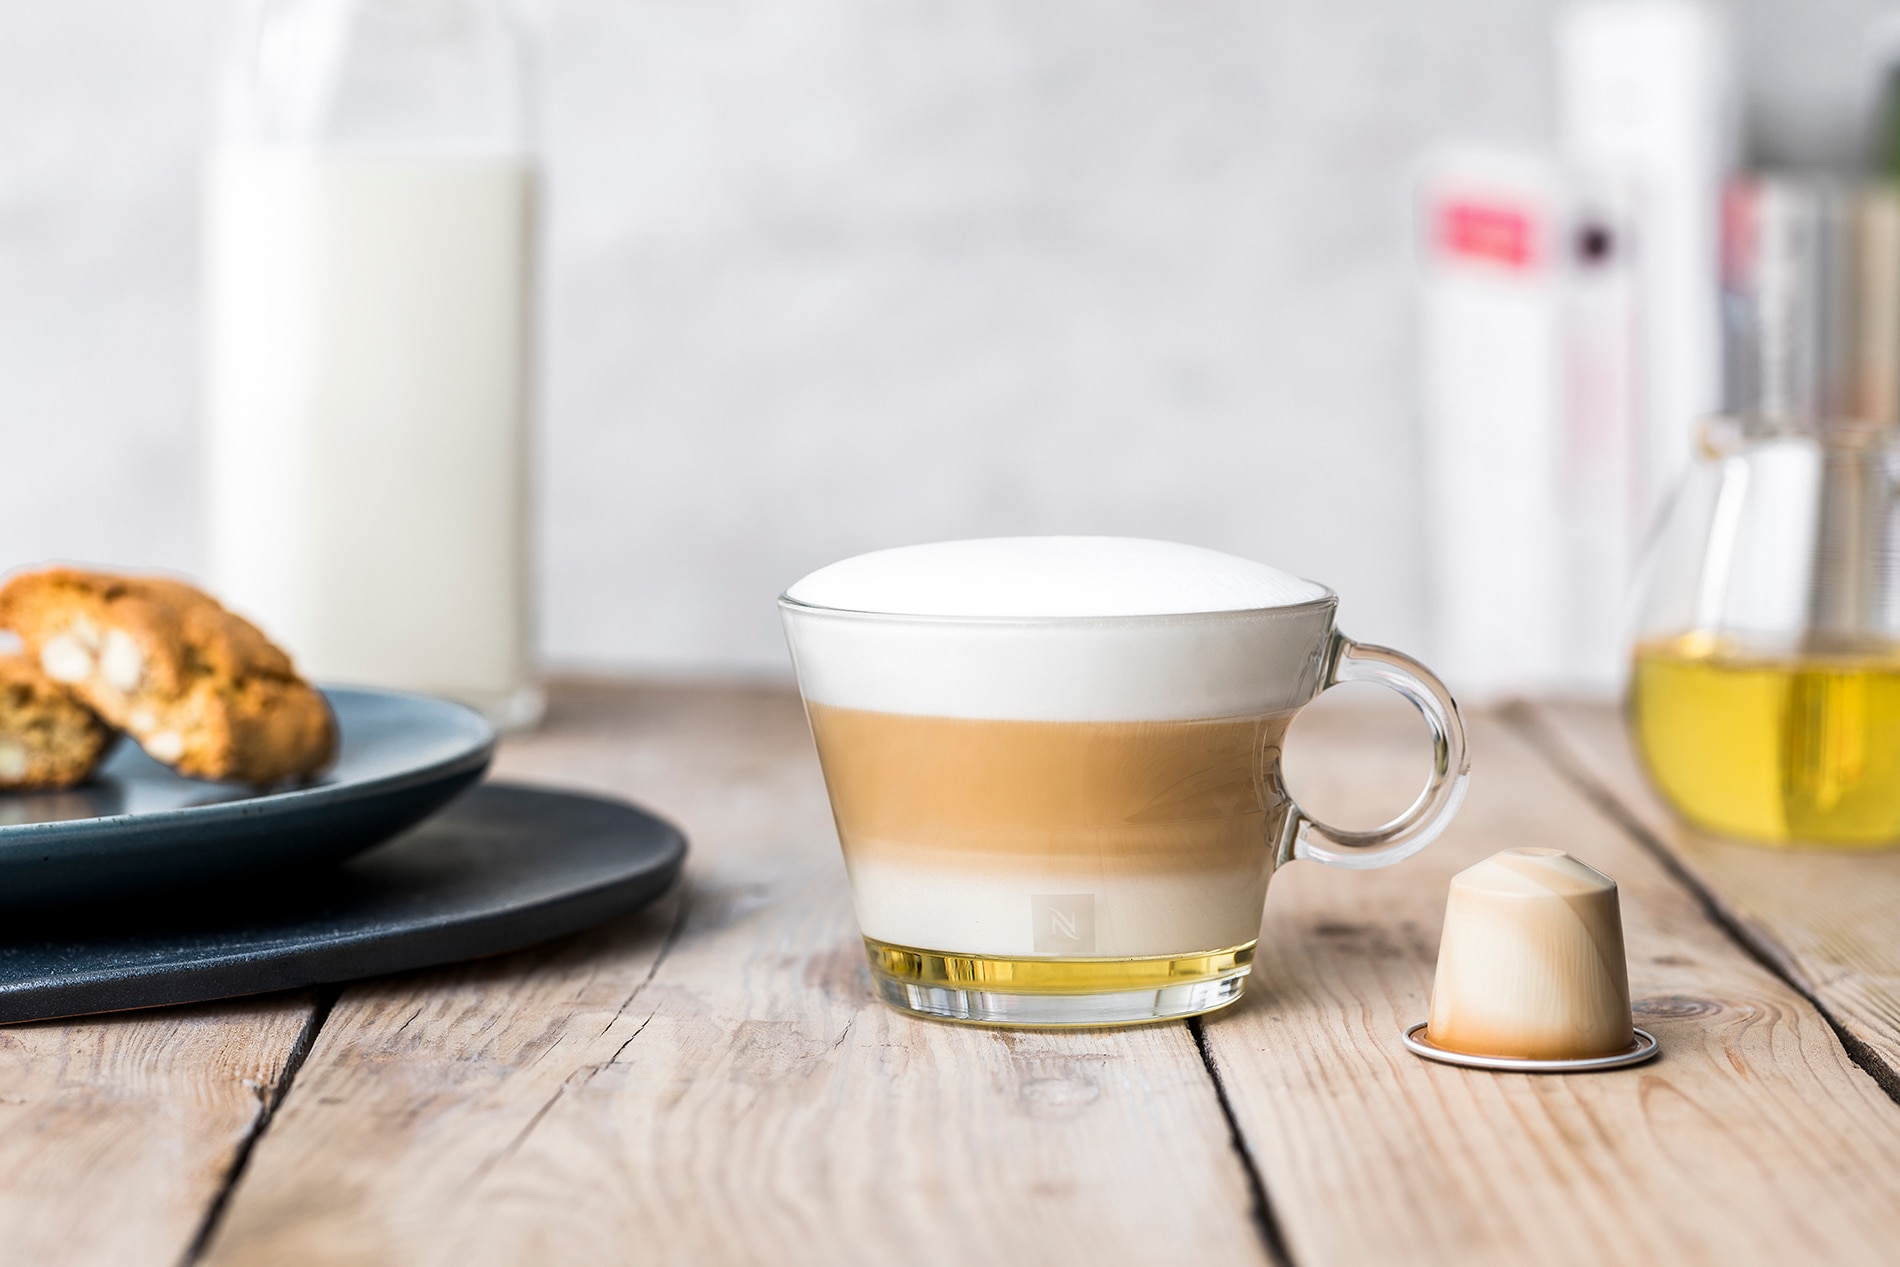 Soy milk and coffee – how to get it right